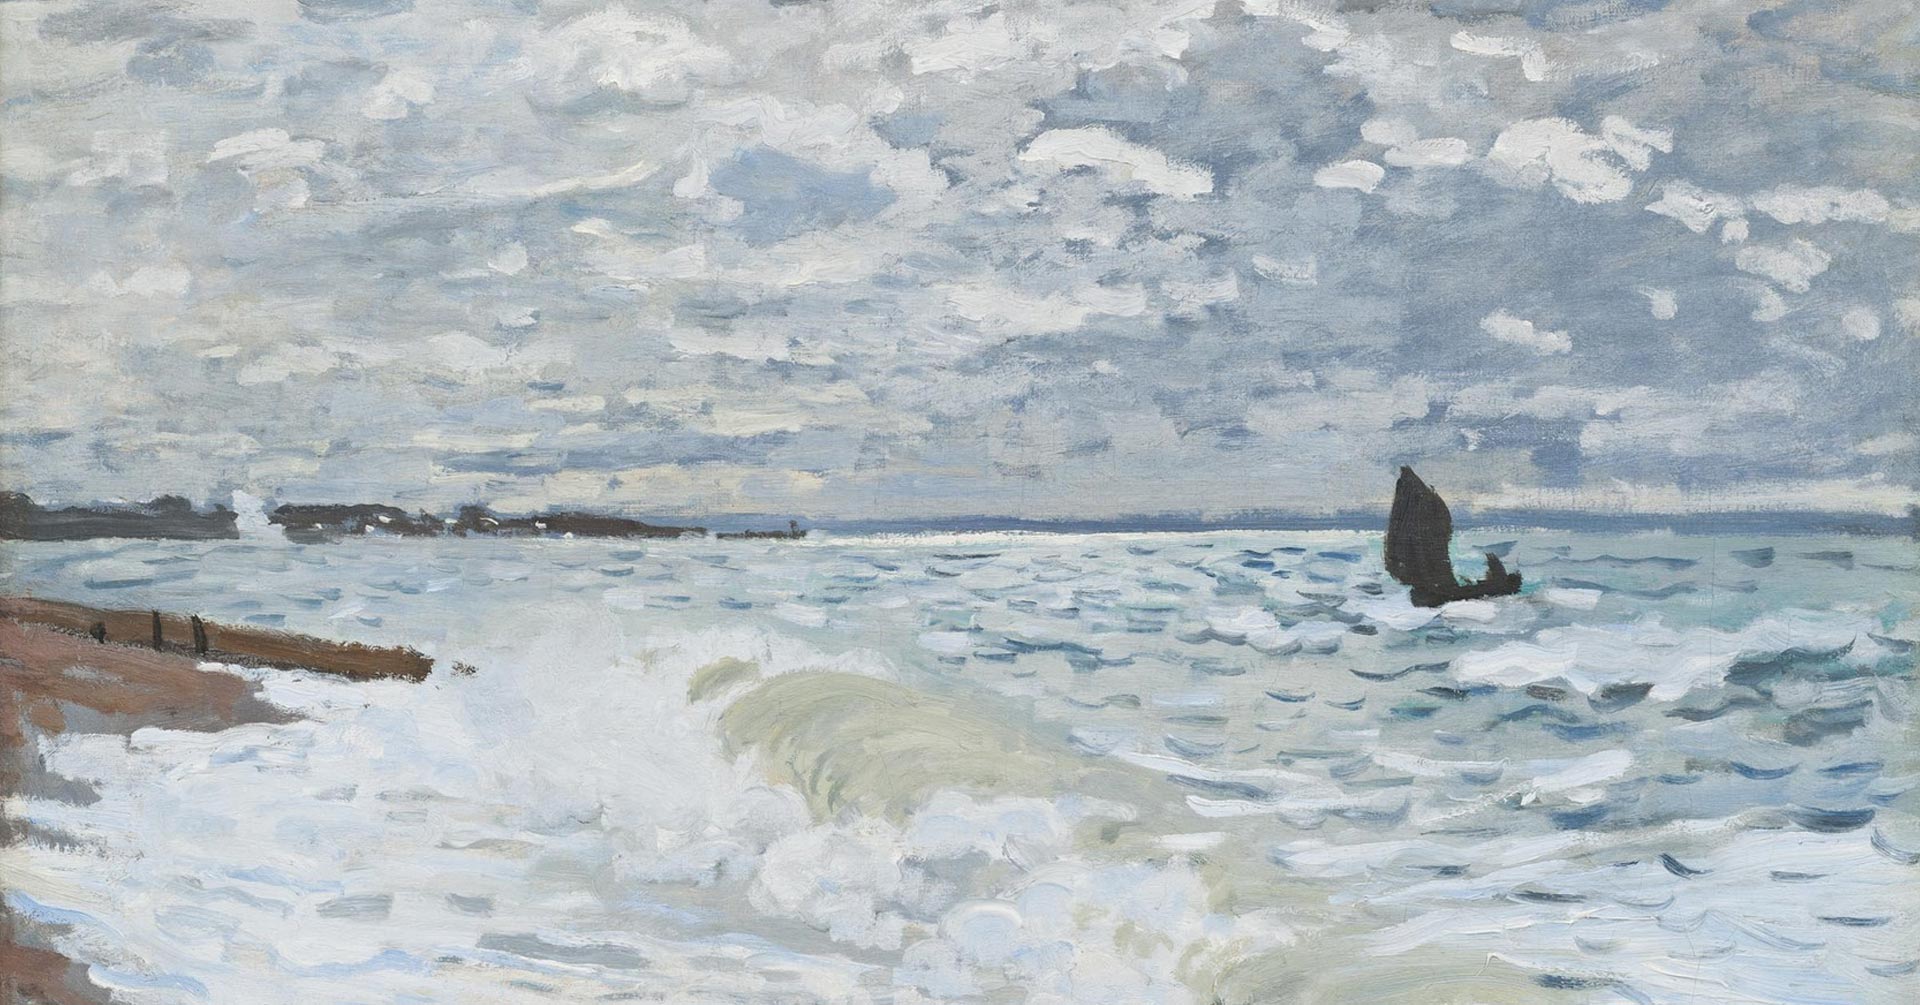 Claude Monet, The Sea at Le Havre, 1868